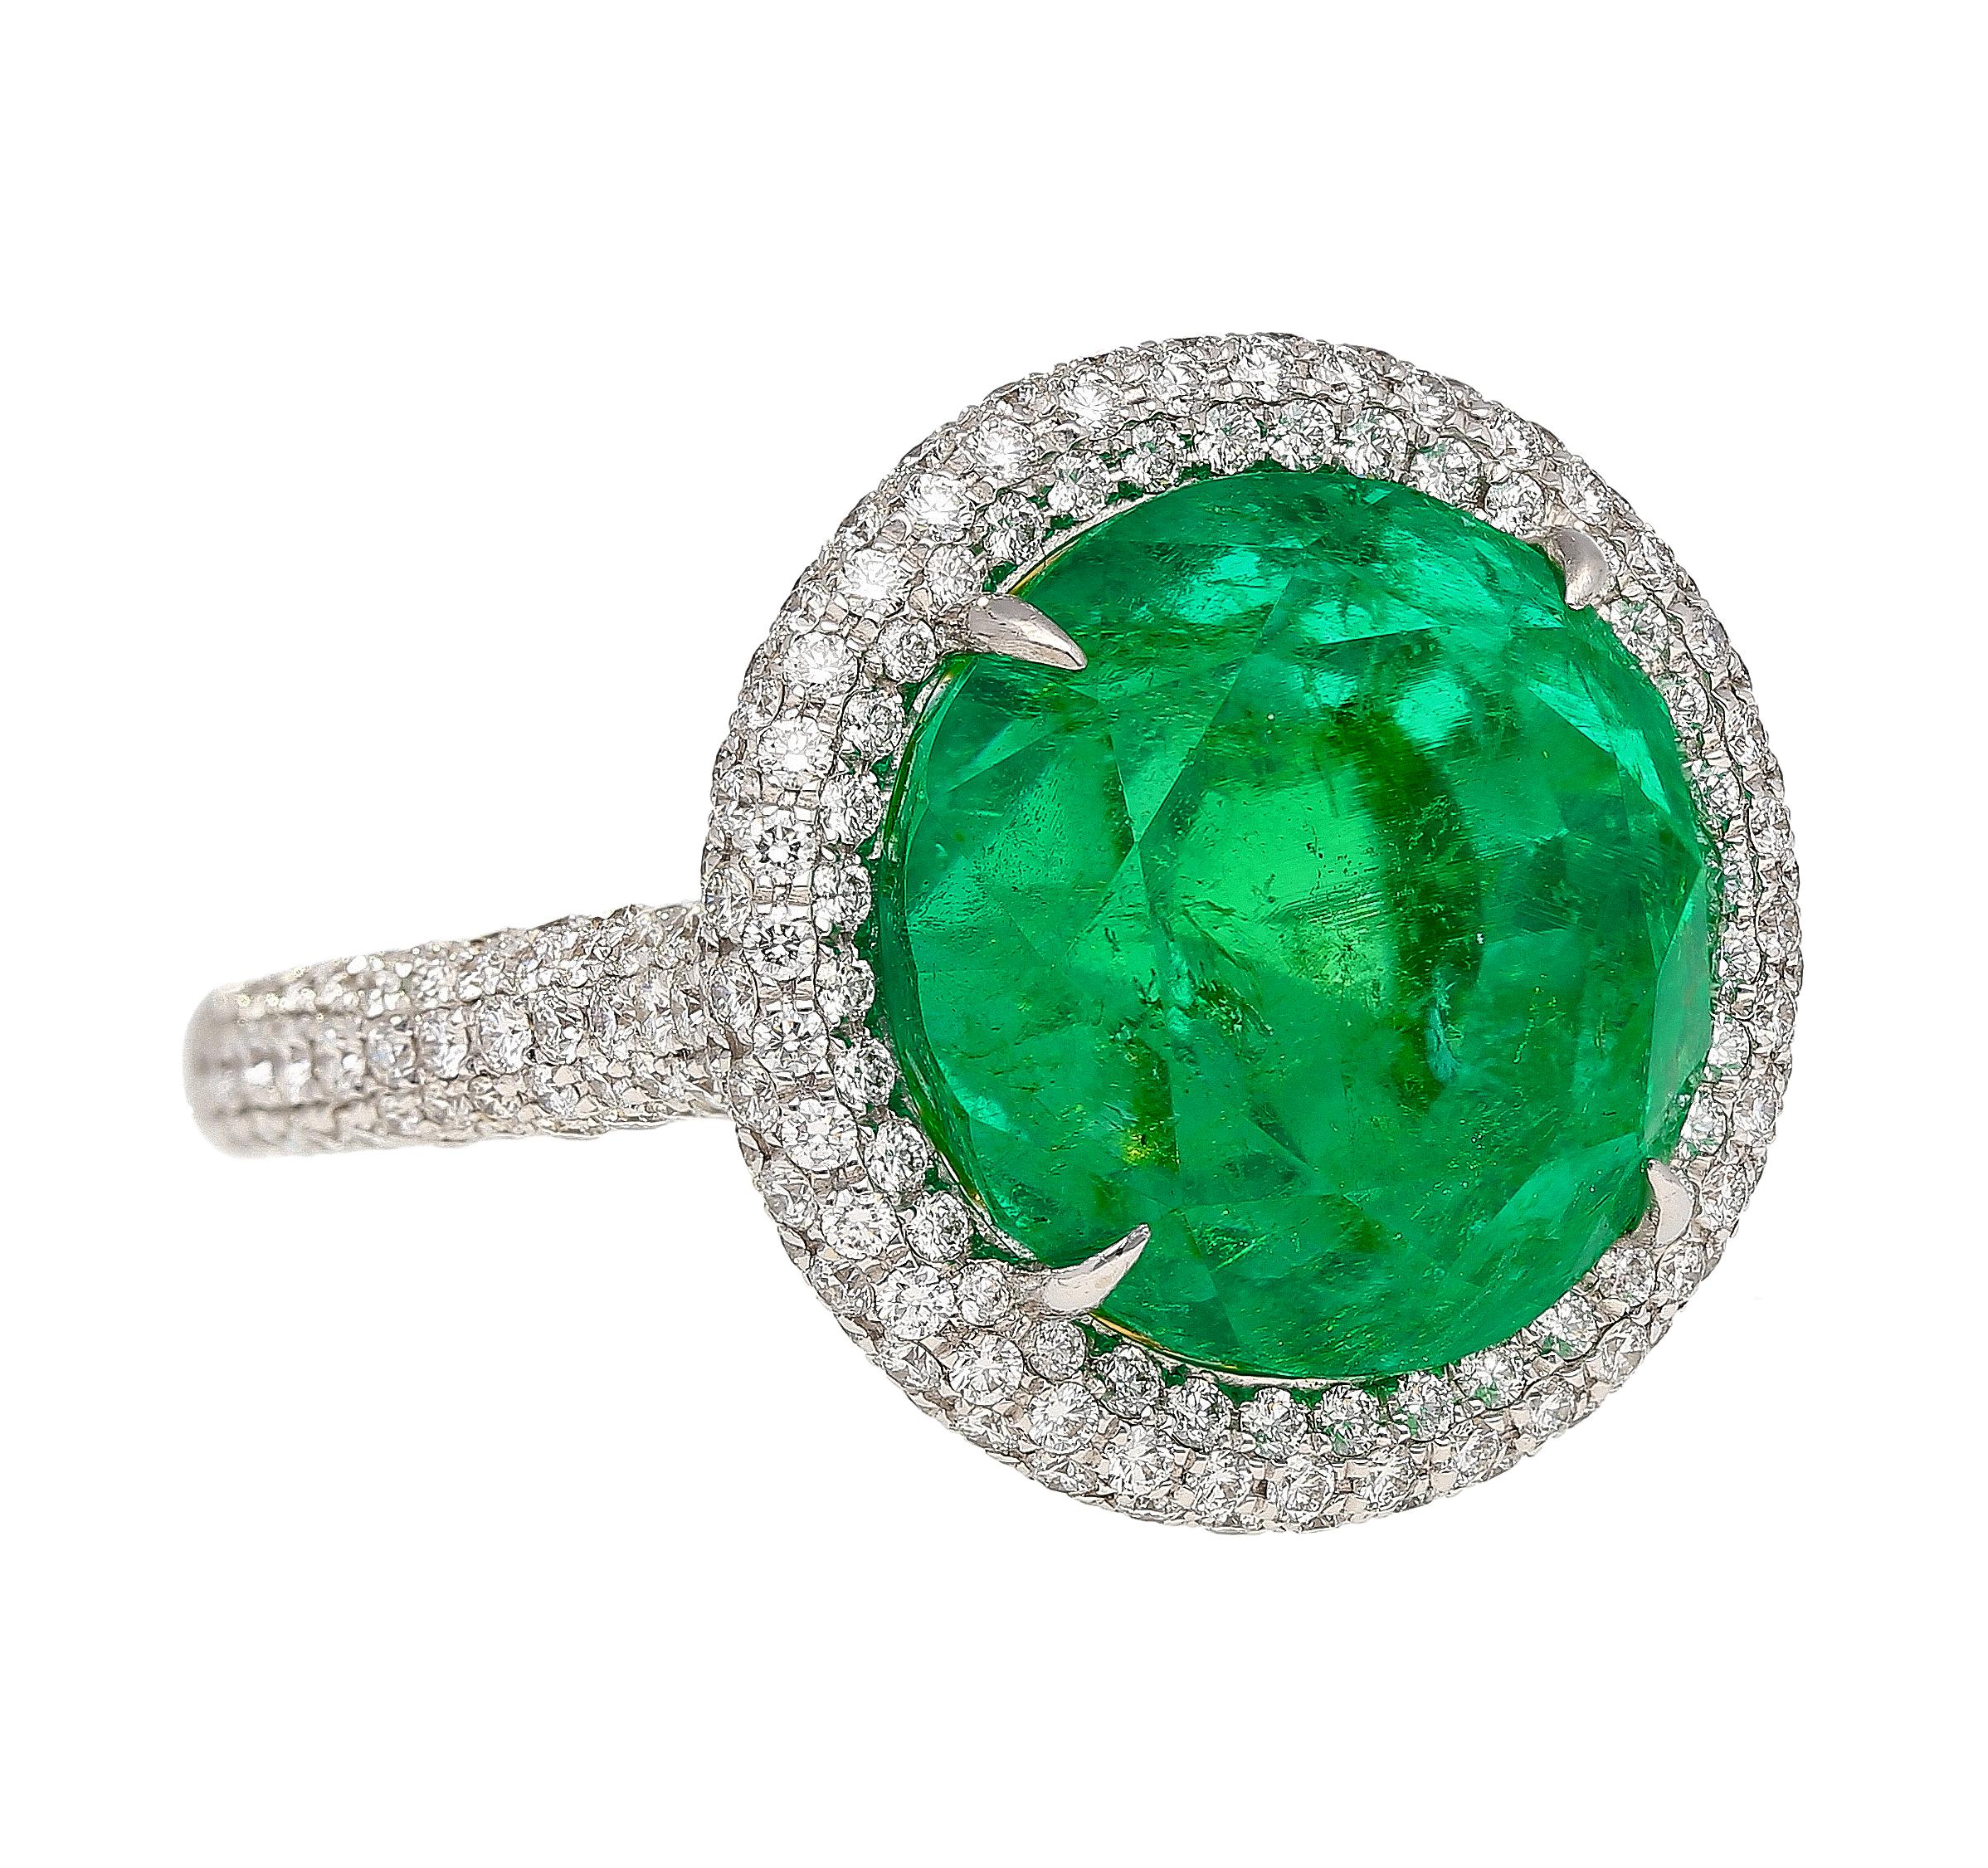 High-quality round cut emeralds are exceptionally rare due to the lower carat weight yield from the rough when compared to the traditional emerald cut. This makes sourcing and cutting these gemstones a challenge for gem cutters and sellers. 

Our